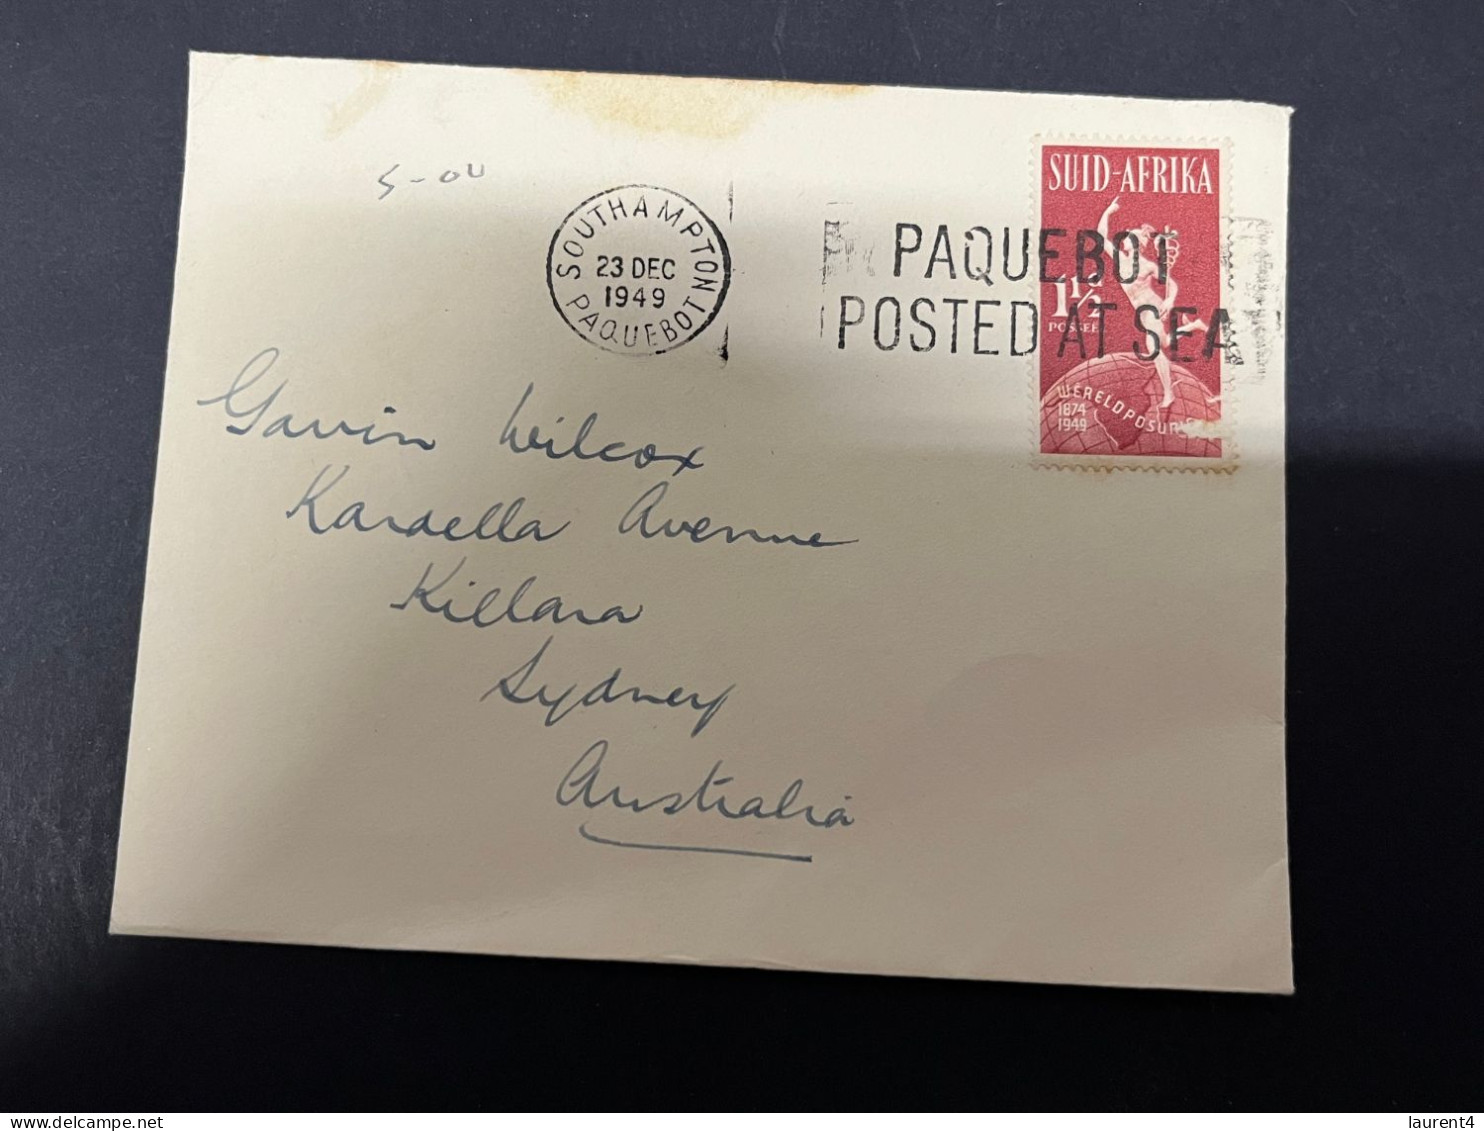 7-12-2023 (3 W 34) Paquebot Mail Posted From South Africa To Australia (1949) As Seen On Scan (Union Castle Line) - Other (Sea)